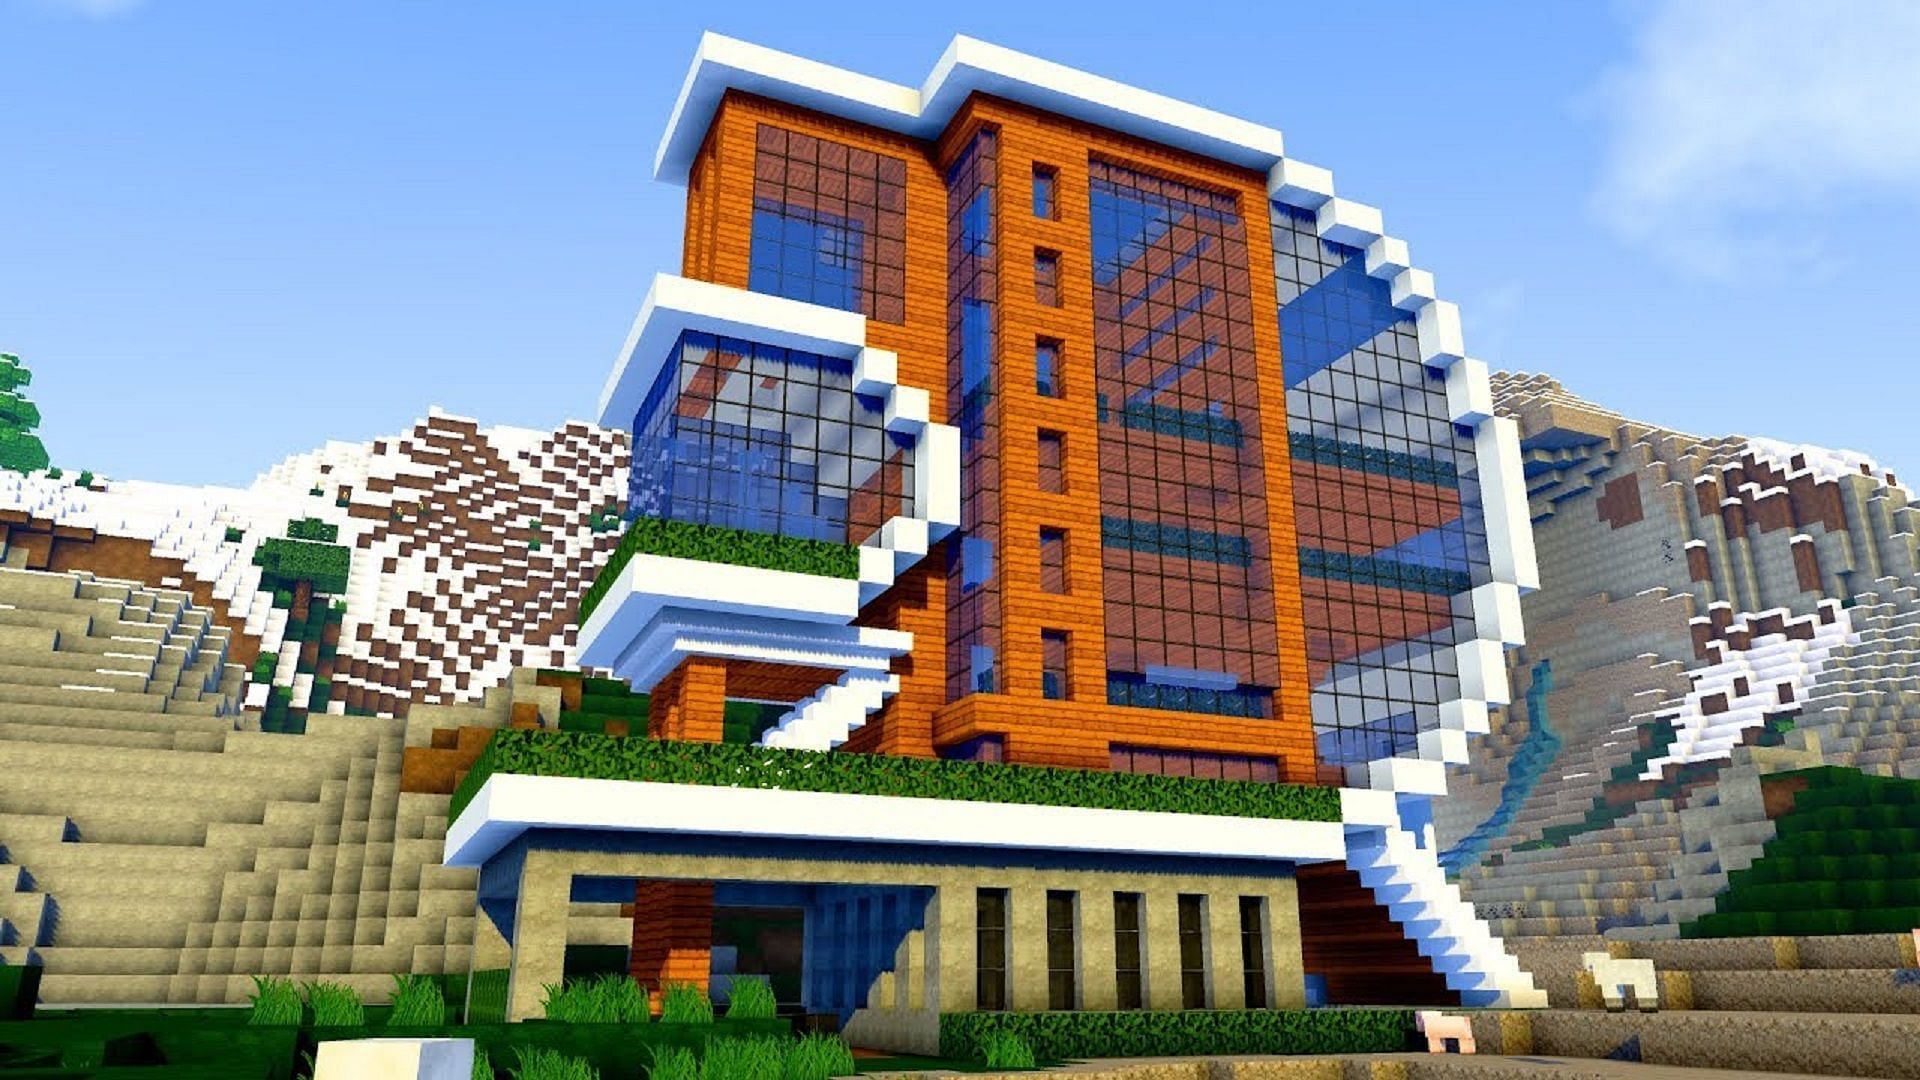 A modernized mansion home in Minecraft (Image via A1MOSTADDICTED MINECRAFT/YouTube)